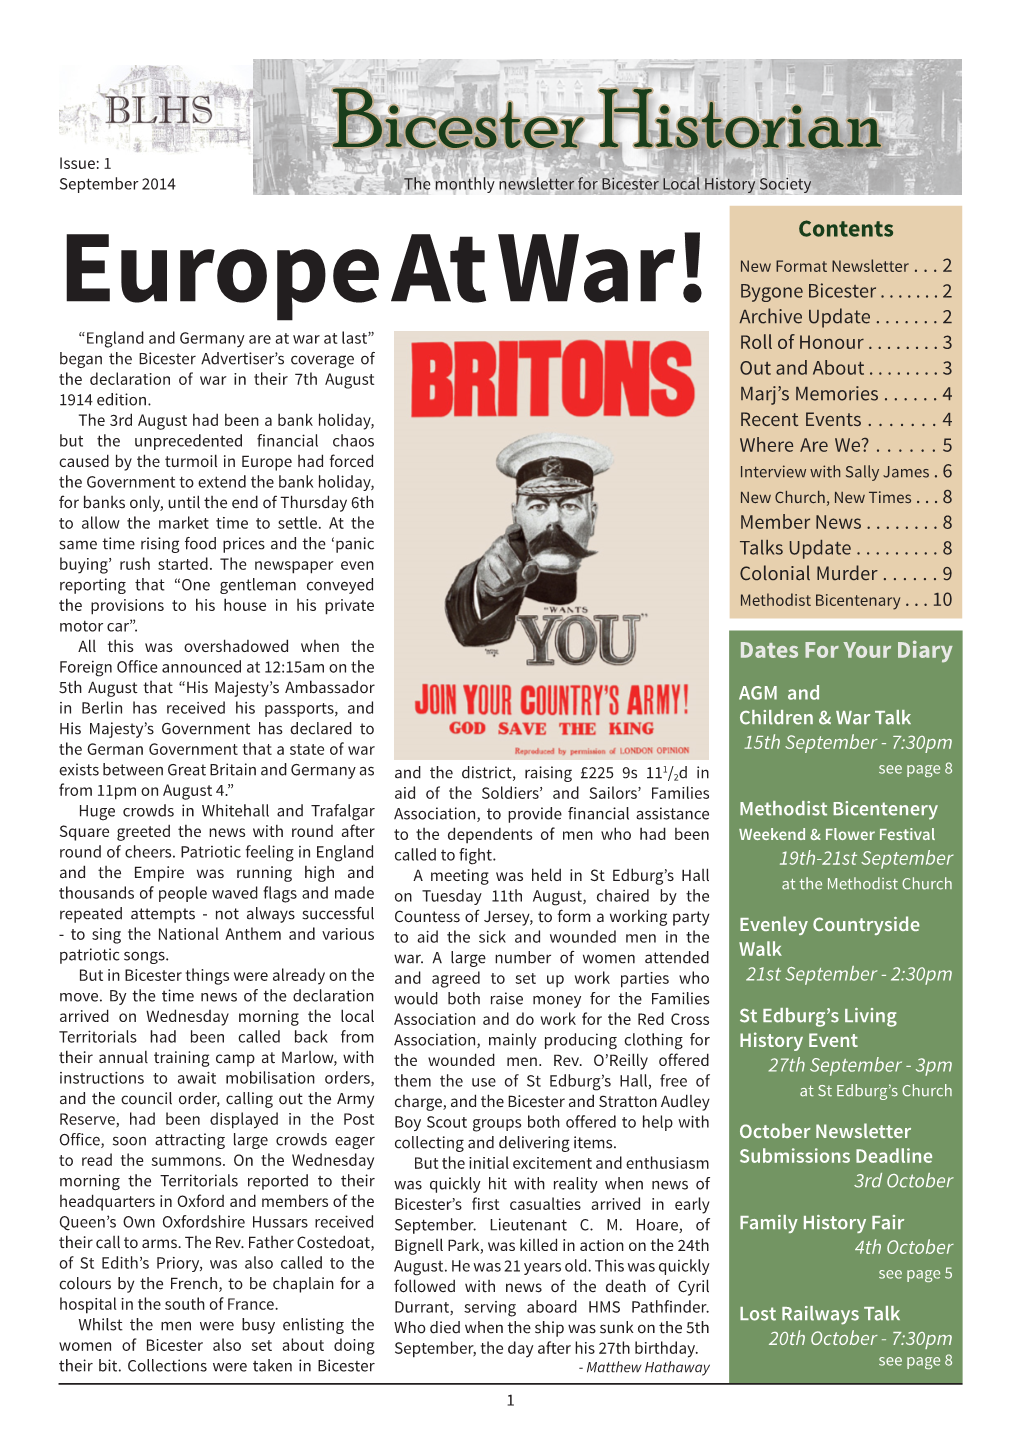 Europe at War! Archive Update